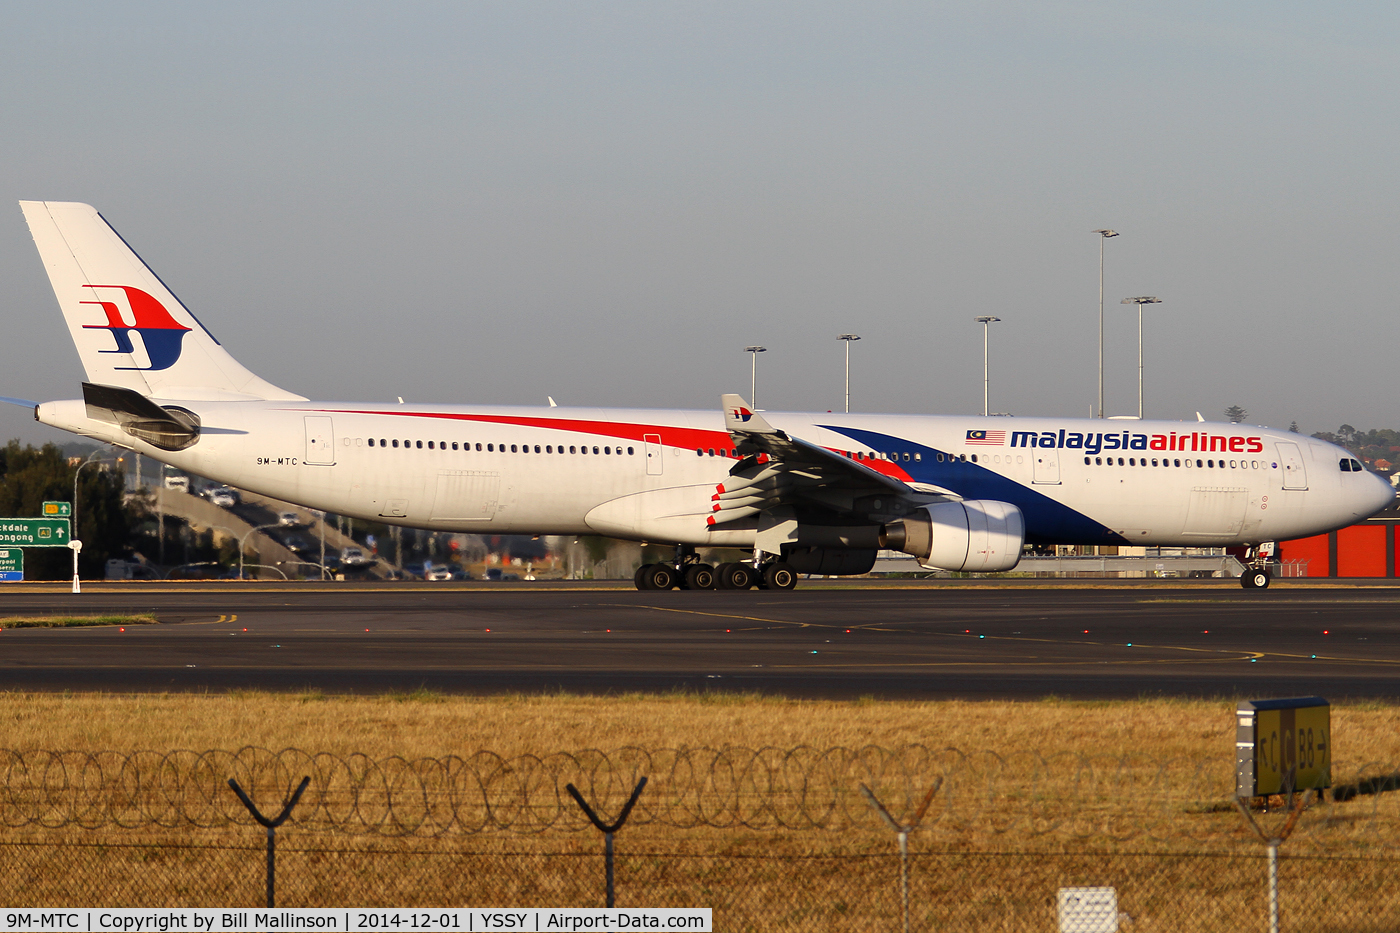 9M-MTC, 2011 Airbus A330-323X C/N 1229, taxiing off 43L